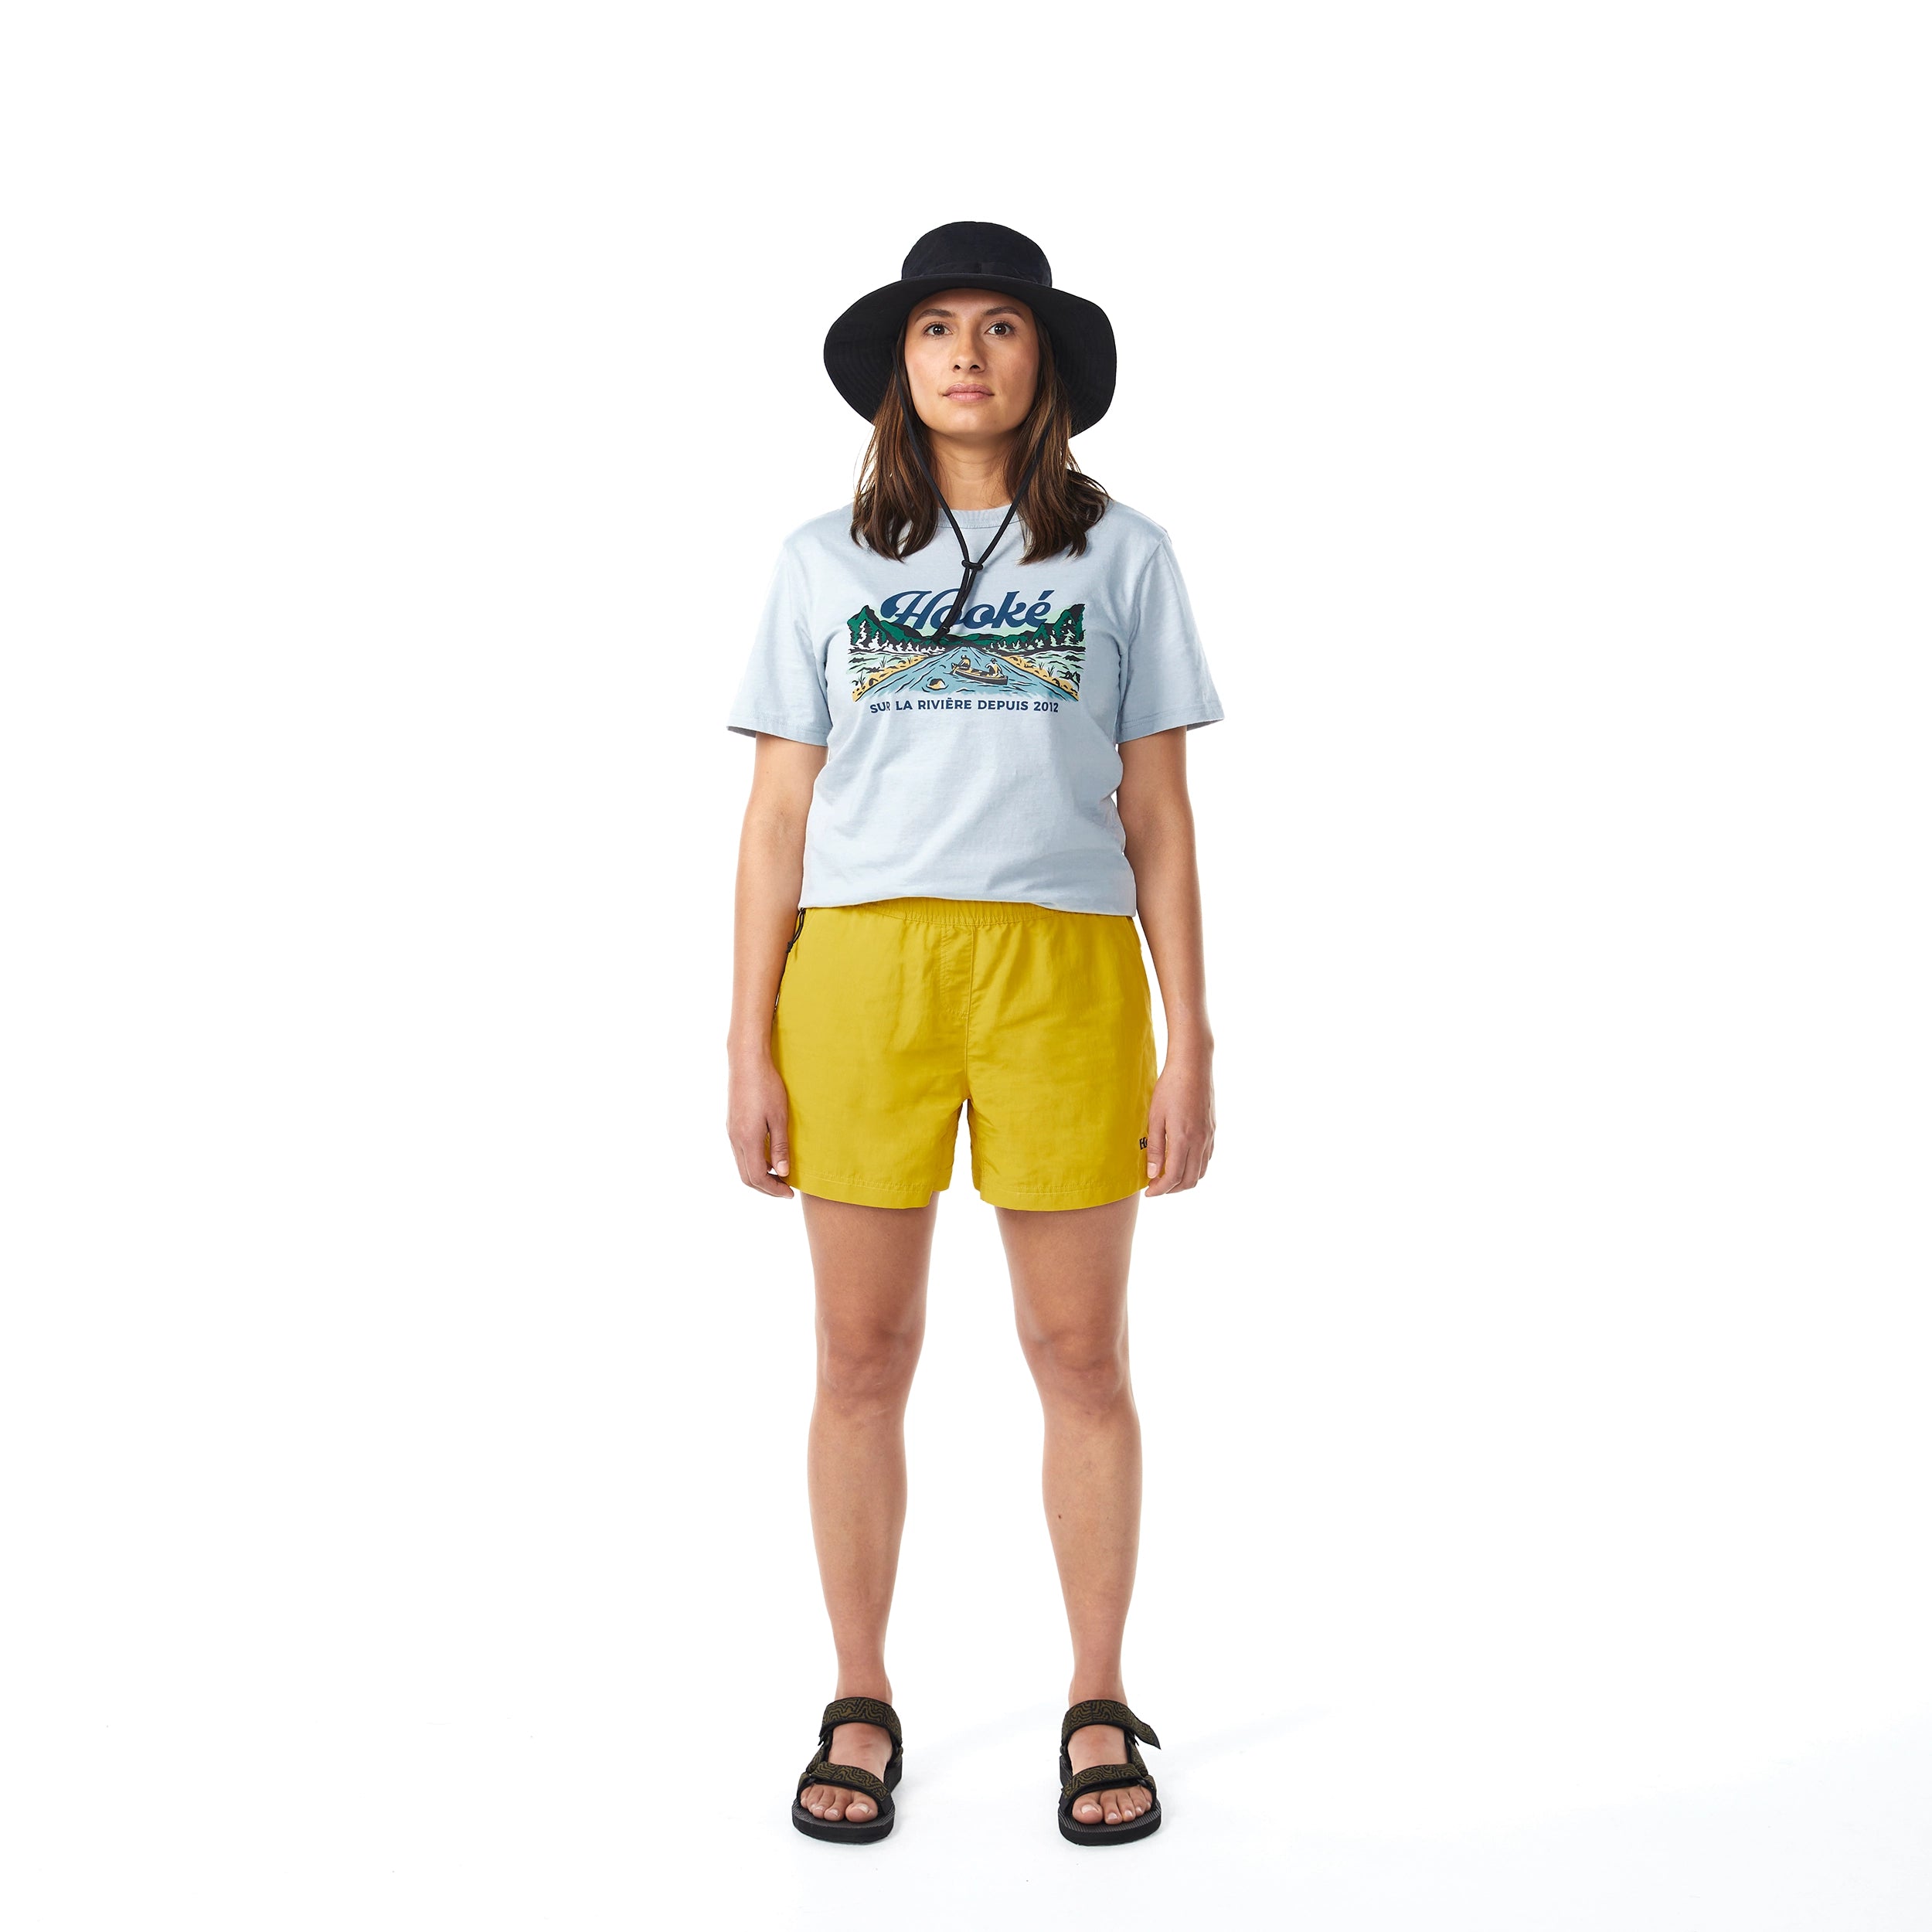 W's River Shorts